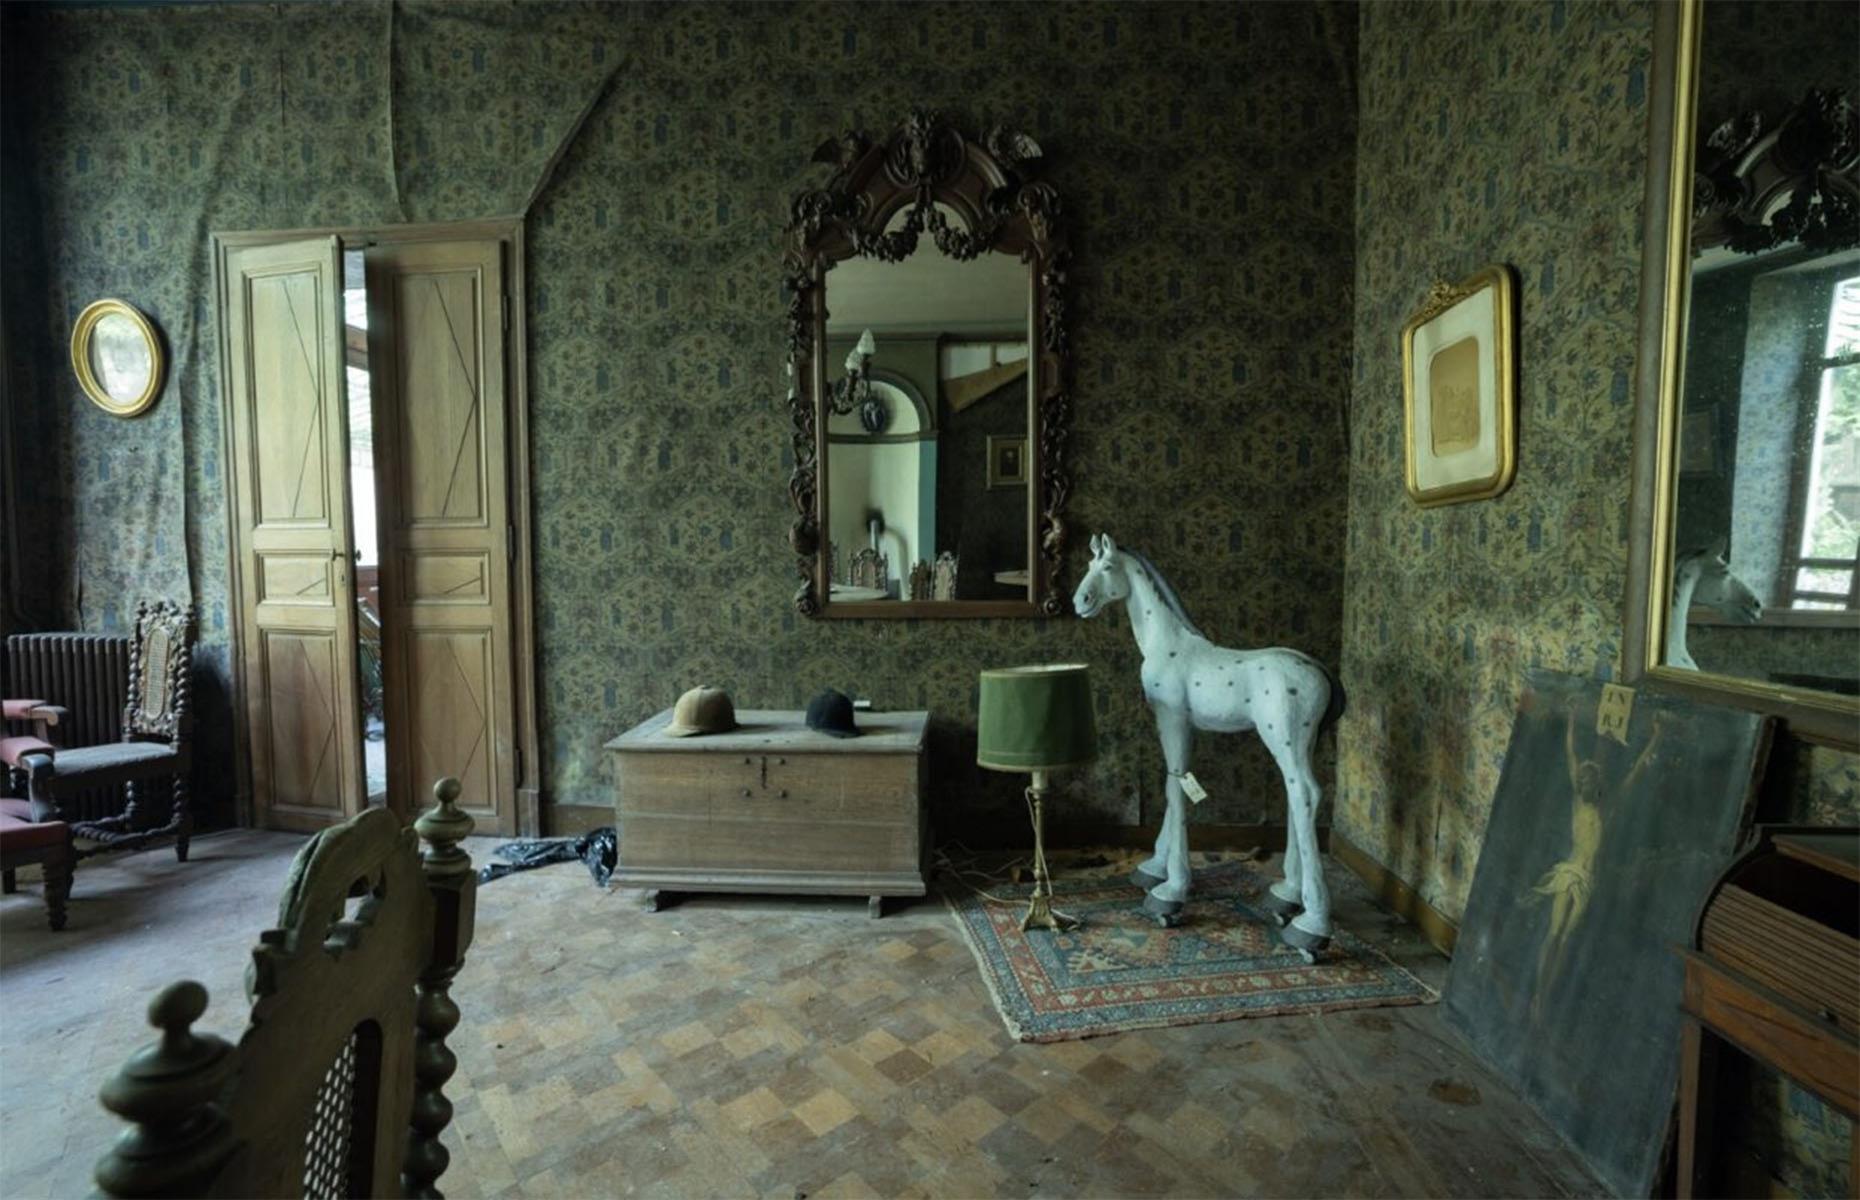 <p>With parquet flooring, damask-clad walls, and heavily gilded mirrors, this home was clearly once designed for a very wealthy family.</p>  <p>With so many expensive treasures still within, including intricately carved wooden furniture and valuable antiques, it’s miraculous that the property has been spared by looters over the years.</p>